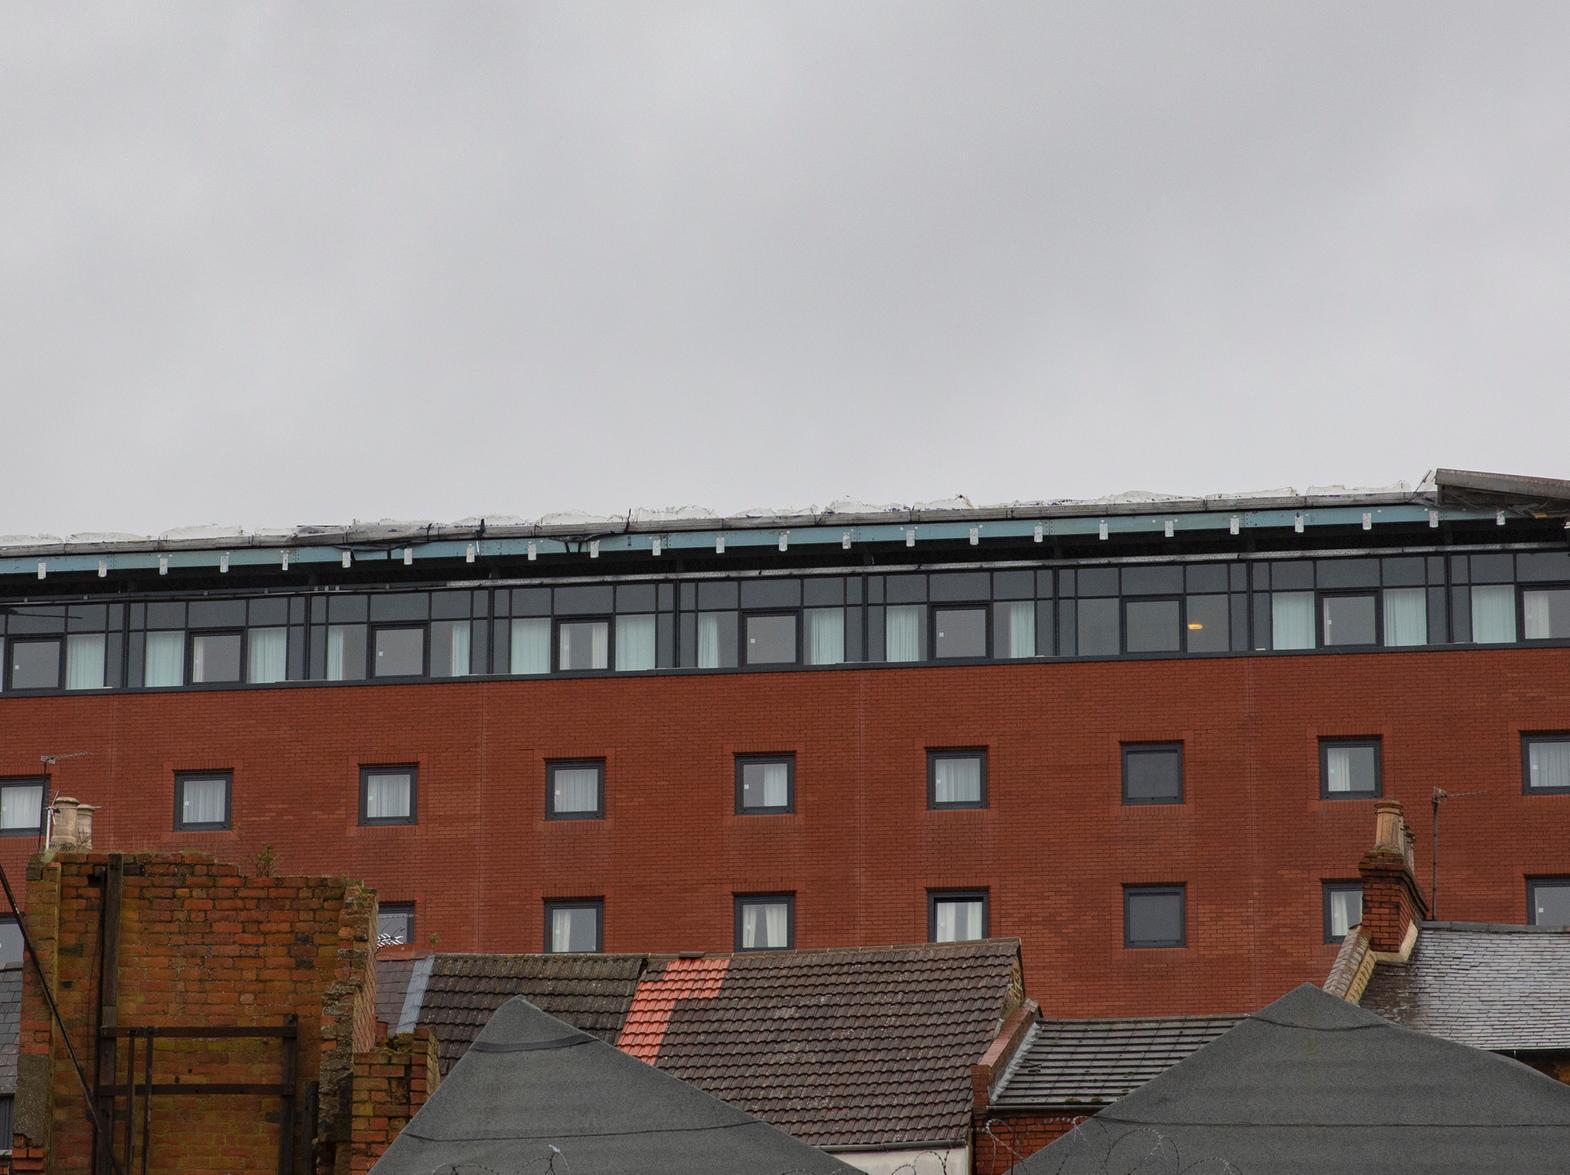 Sections of the Sol Central building's roof in Northampton town centre have been blown off by high winds this morning.